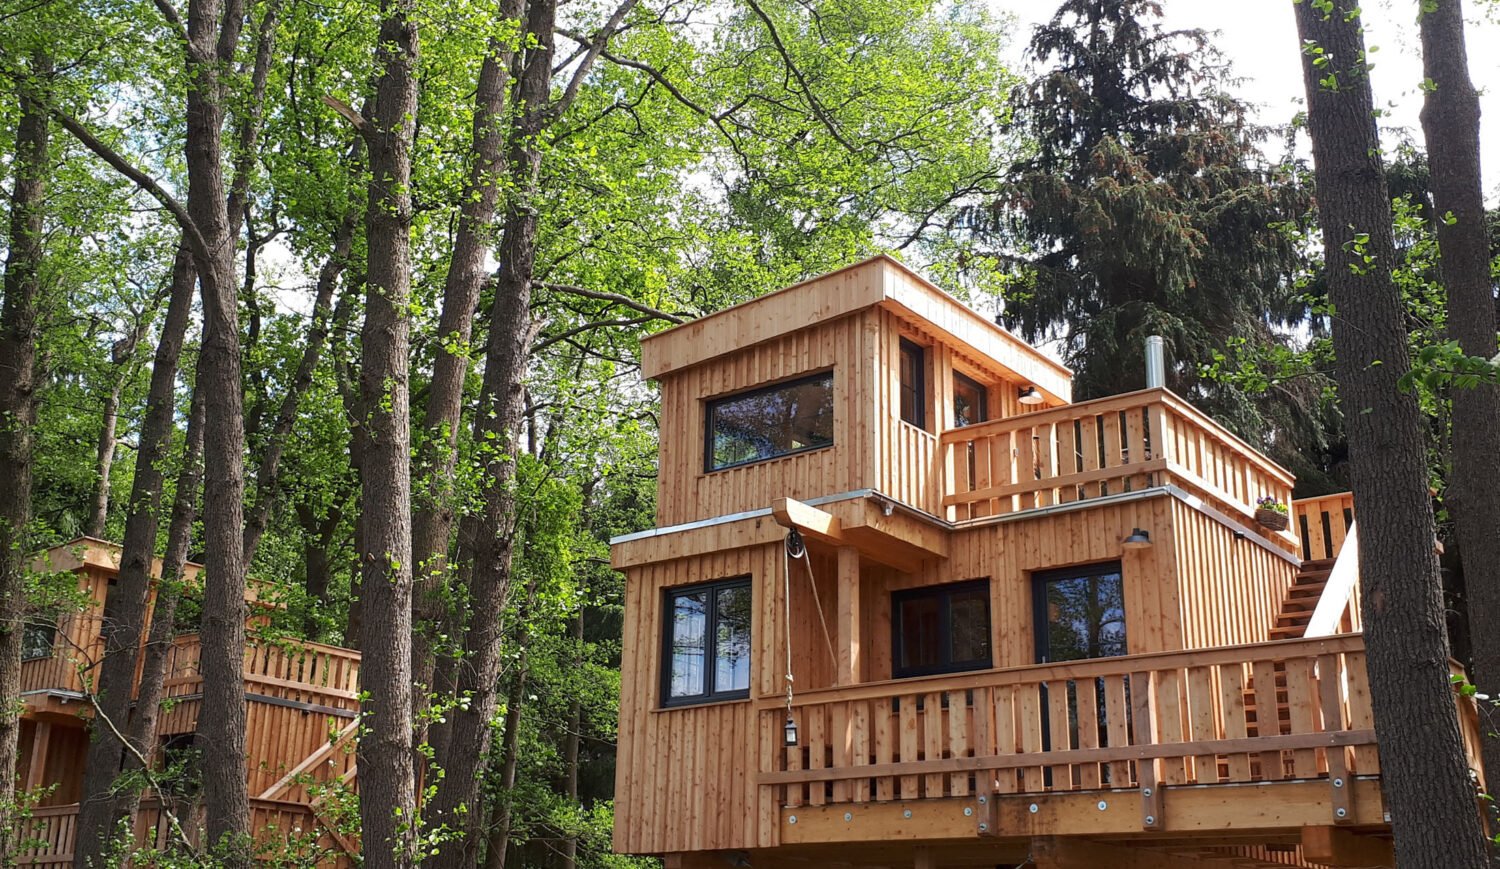 The tree houses are well equipped. The highlight is the 15-square-meter roof terrace with outdoor bathtub on the upper floor © Land of Green / Anni Vieth